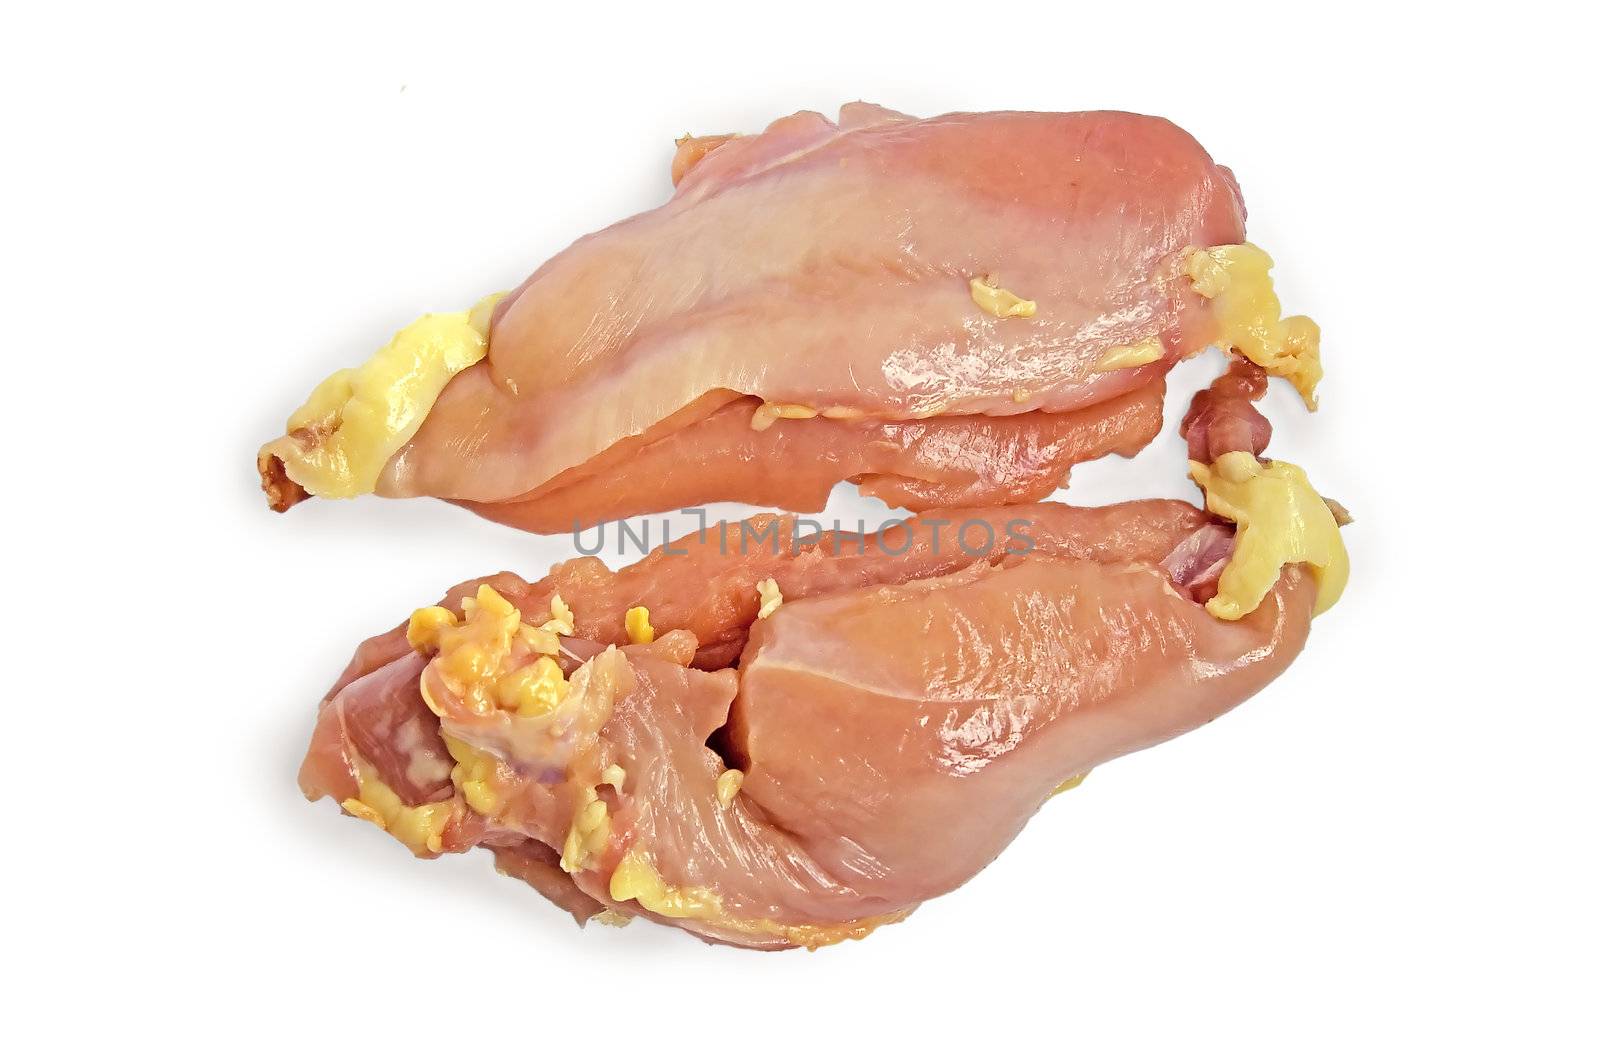 Raw meat chicken breast is isolated on a white background